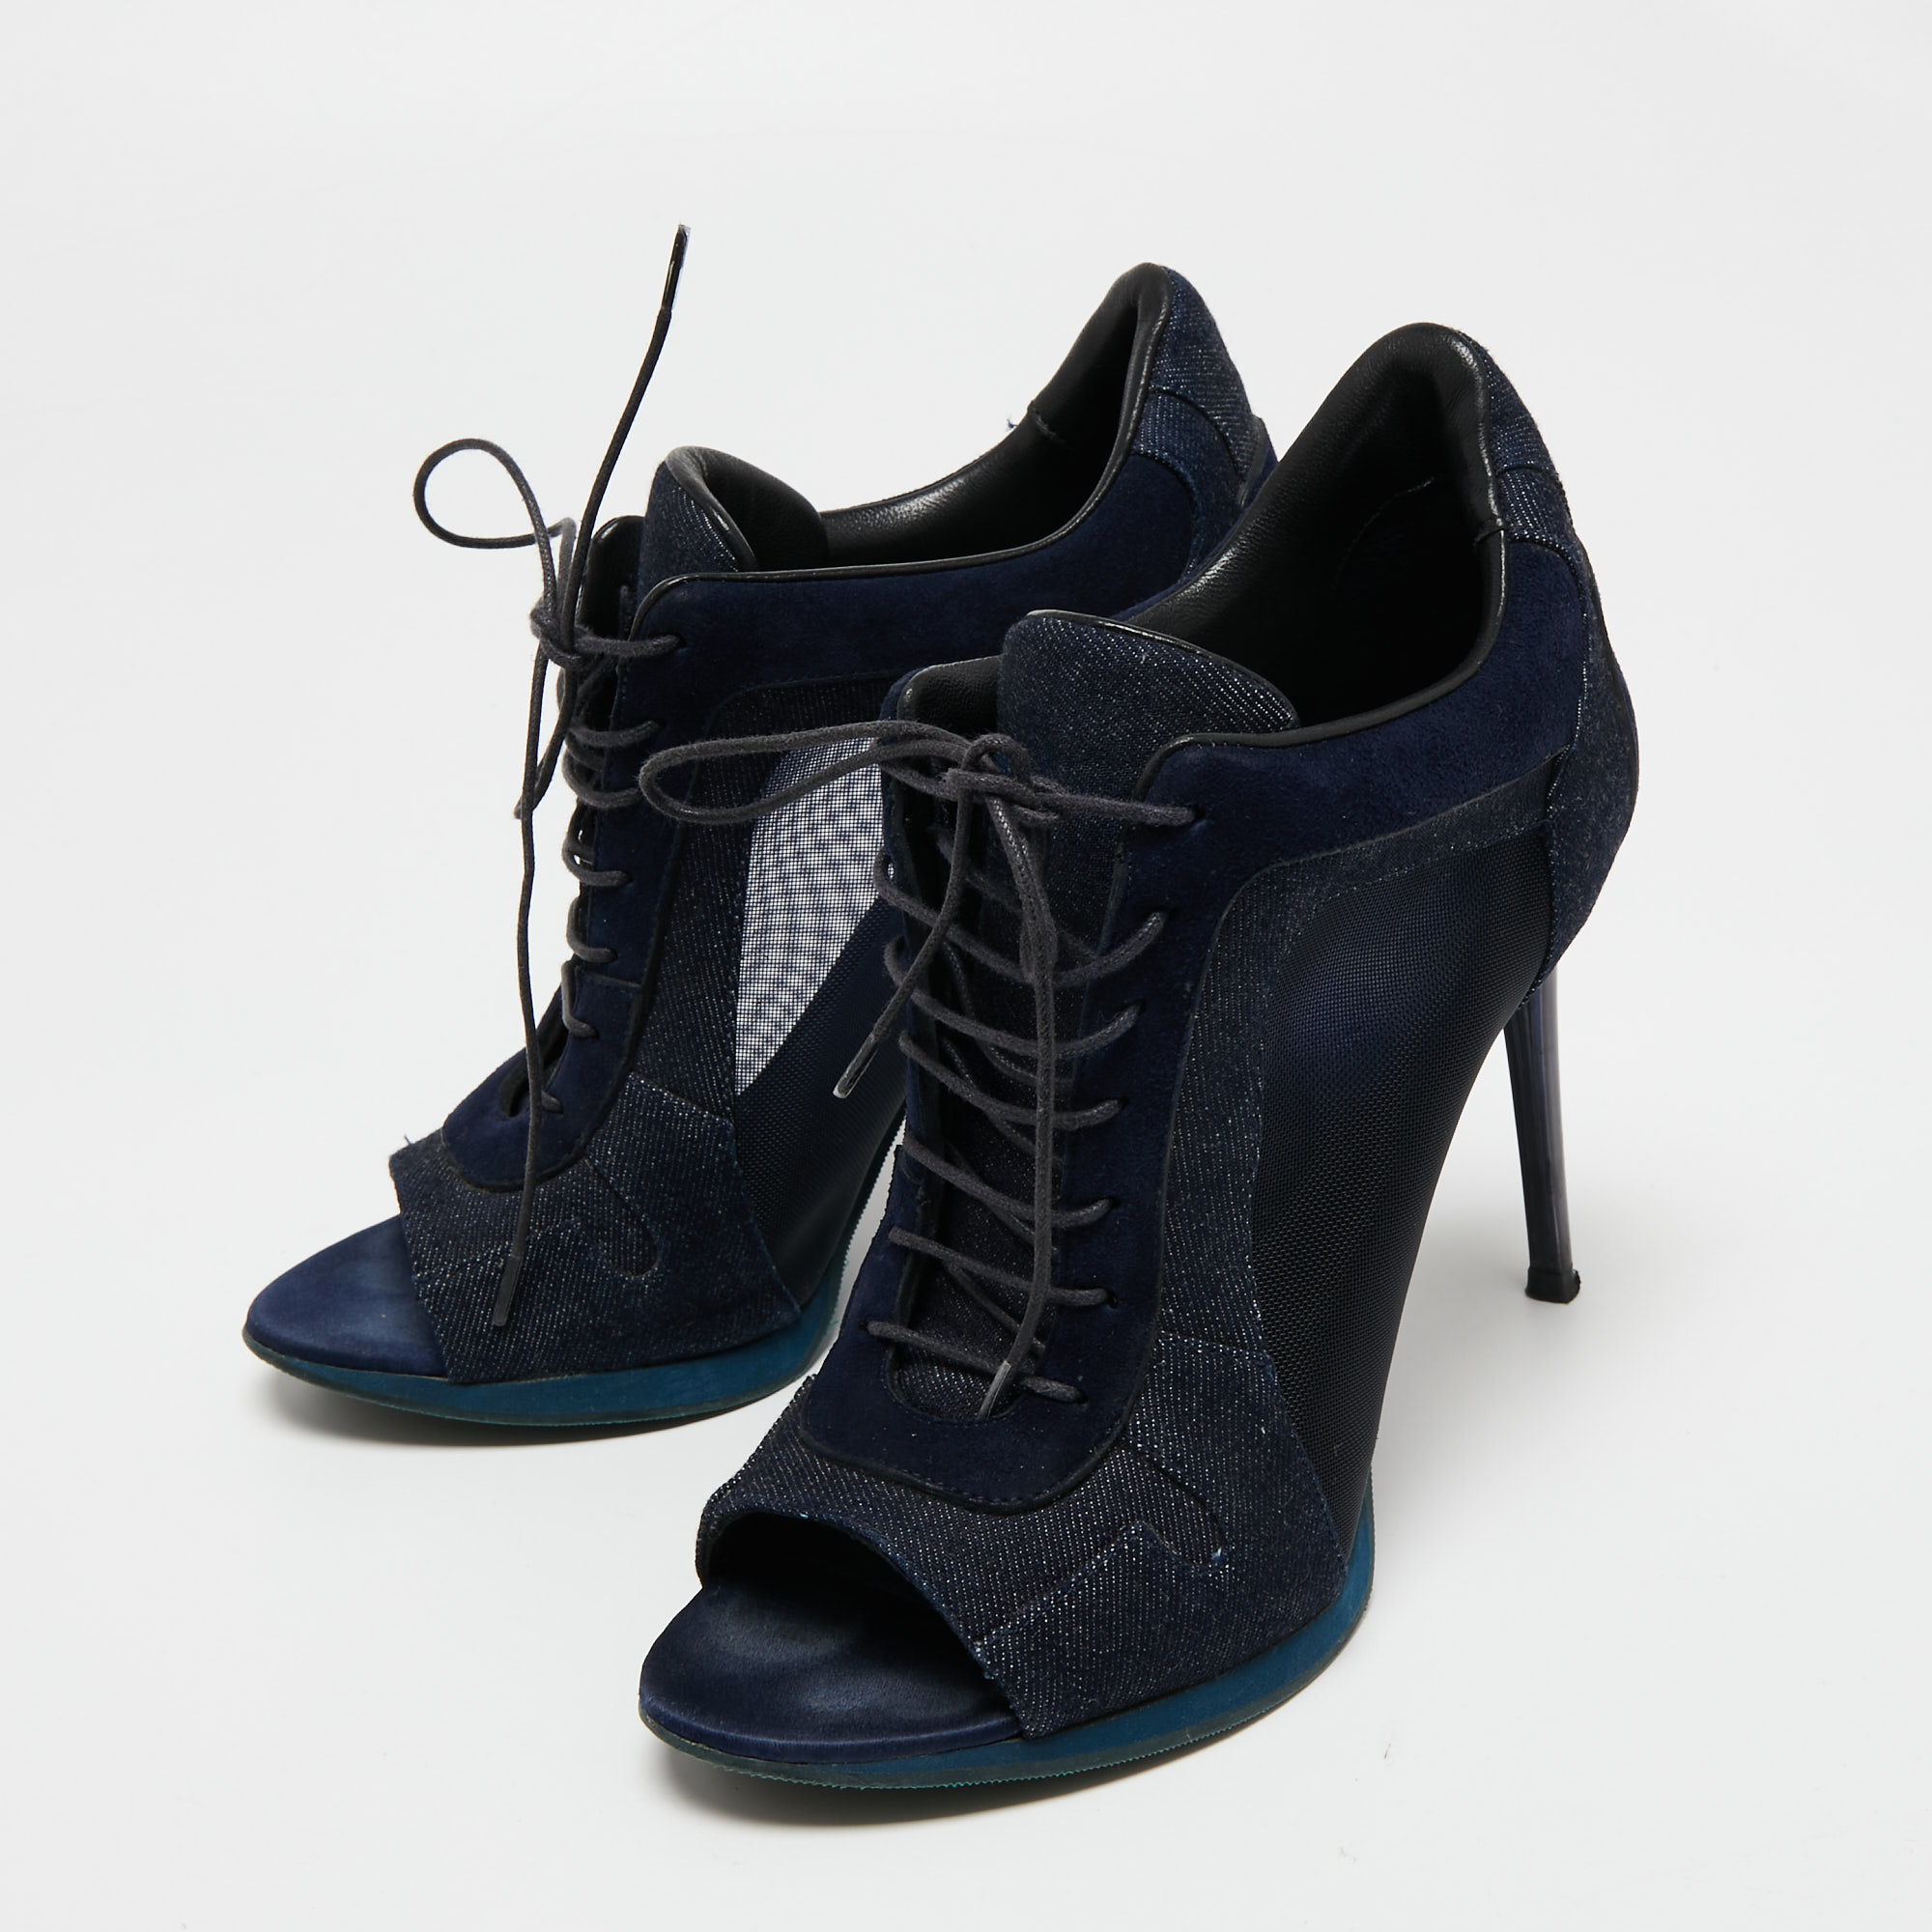 

Burberry Navy Blue Denim And Mesh Lace Up Peep Toe Ankle Booties Size